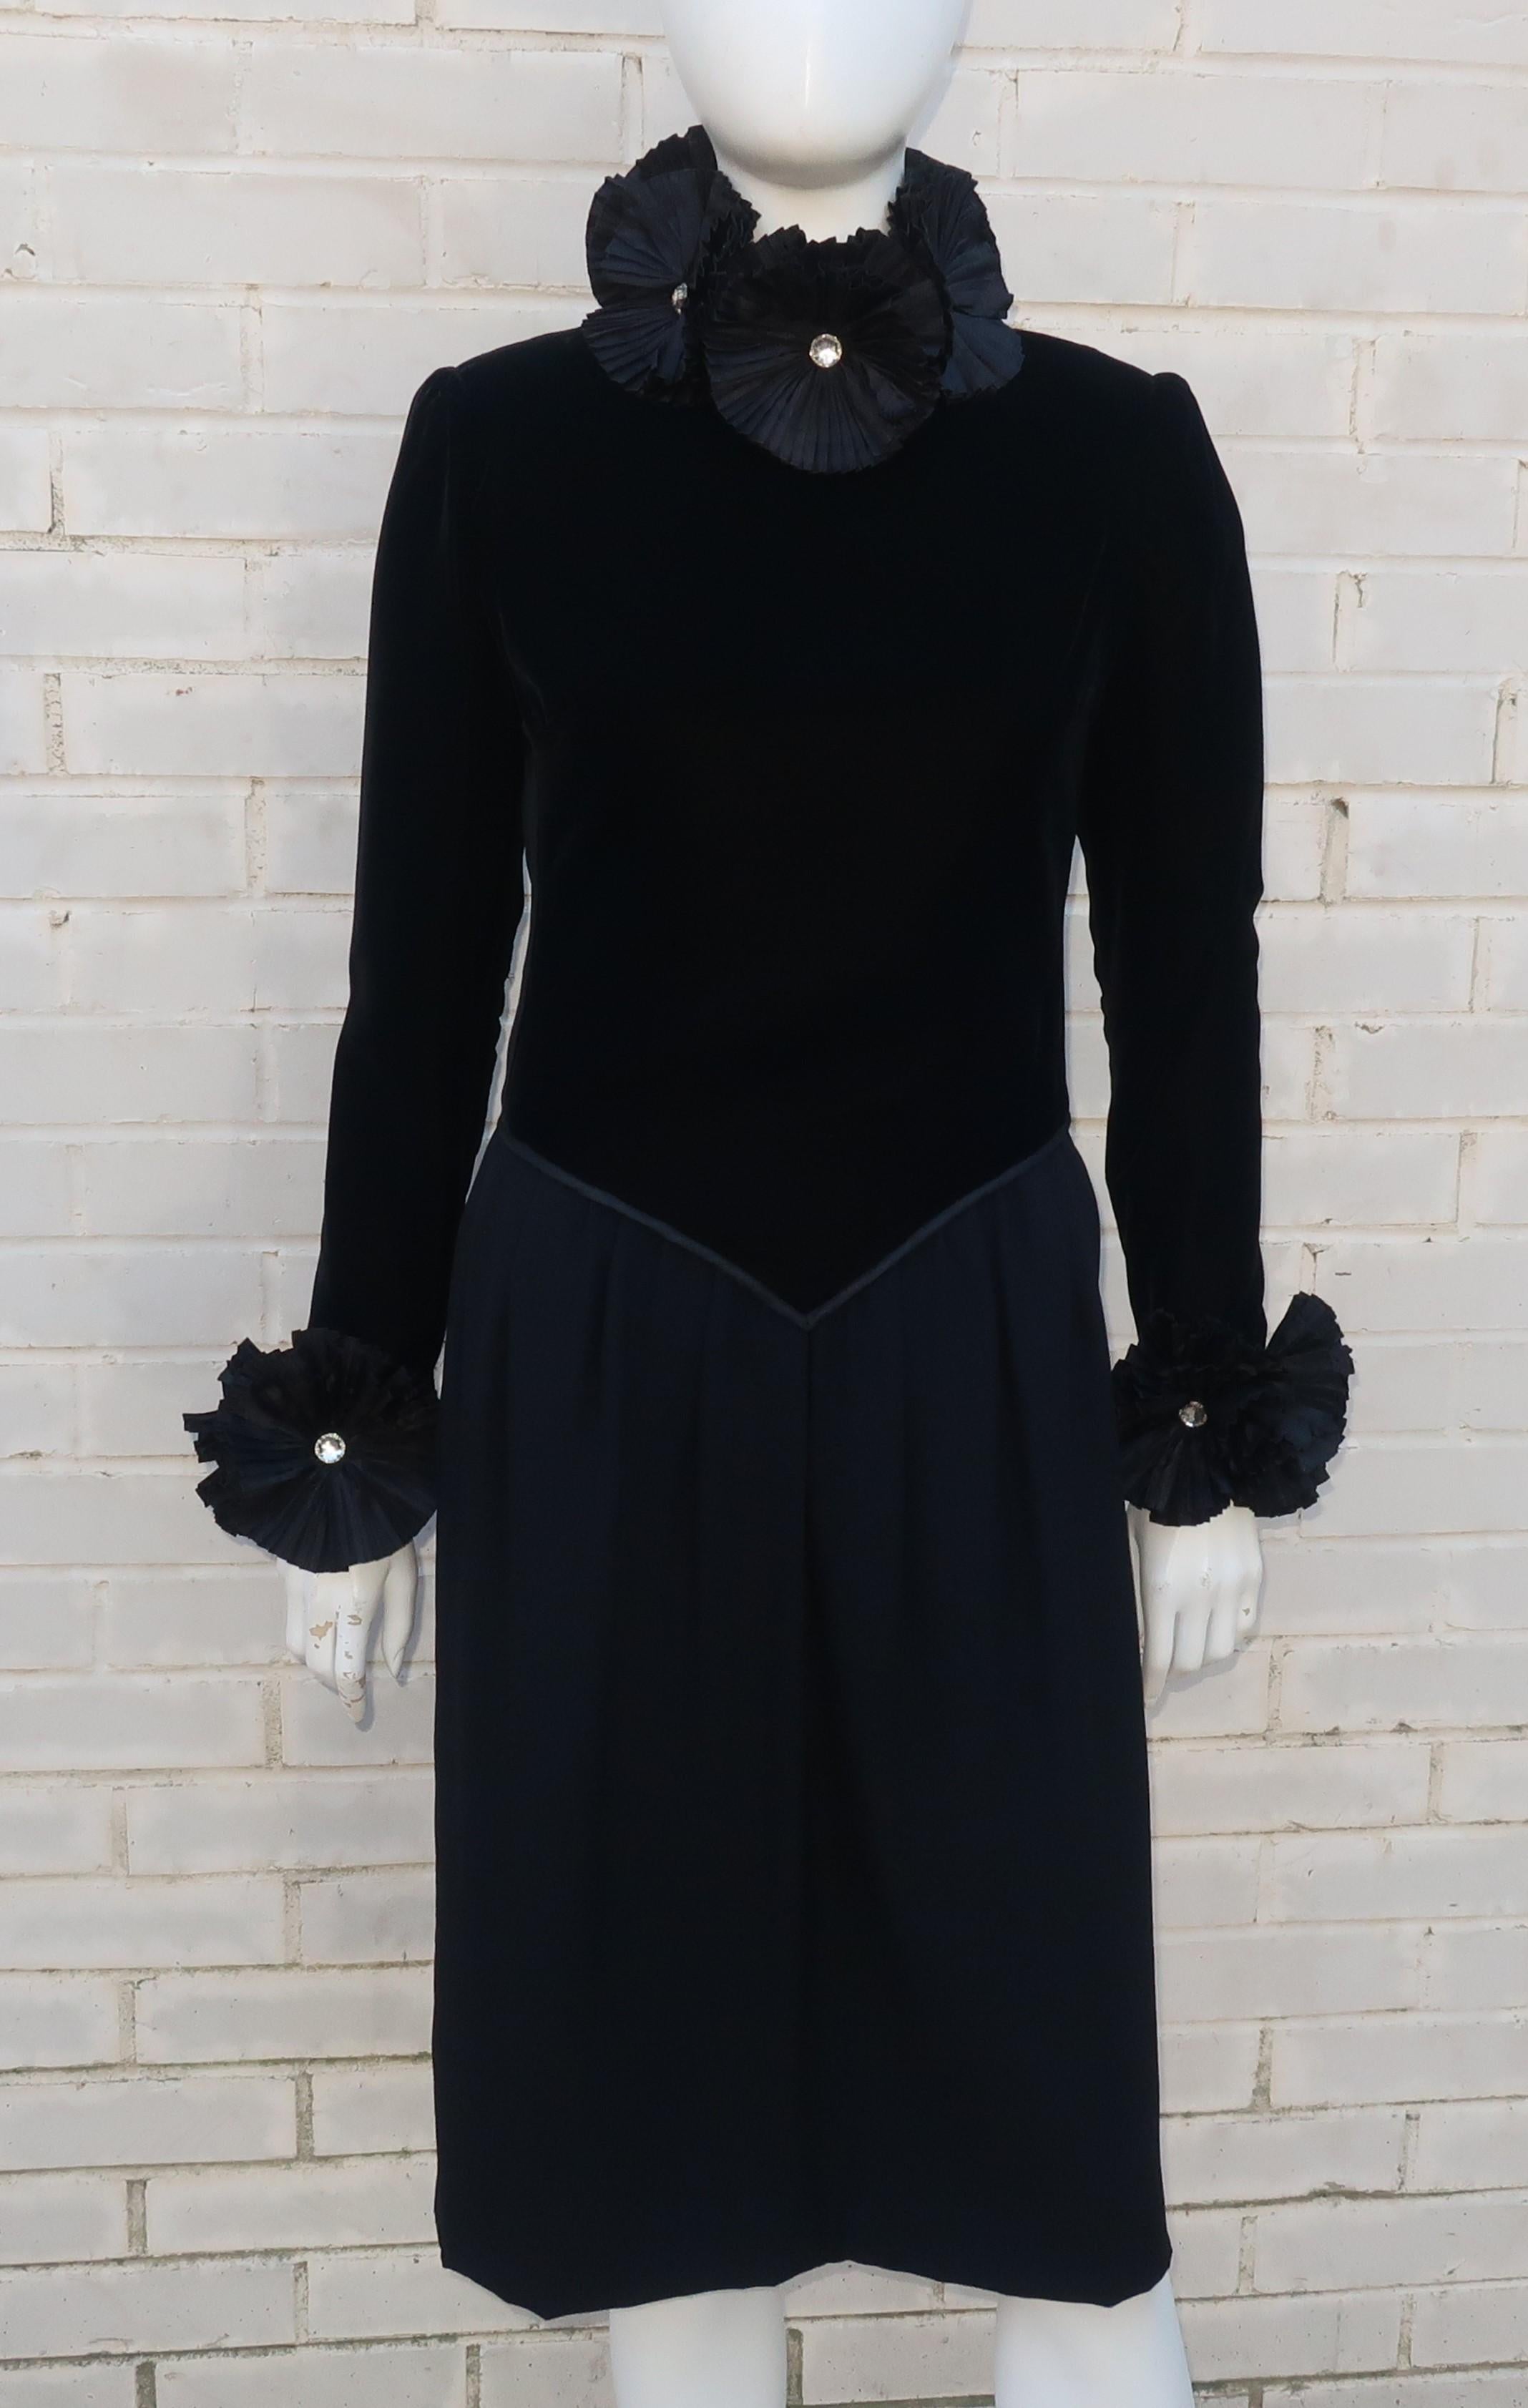 This C.1980 Nina Ricci Haute Boutique black cocktail dress offers an austere femininity with the addition of the modern version of an Elizabethan ruff collar.  The velvet bodice is structured in an elegant way providing an excellent foil for the